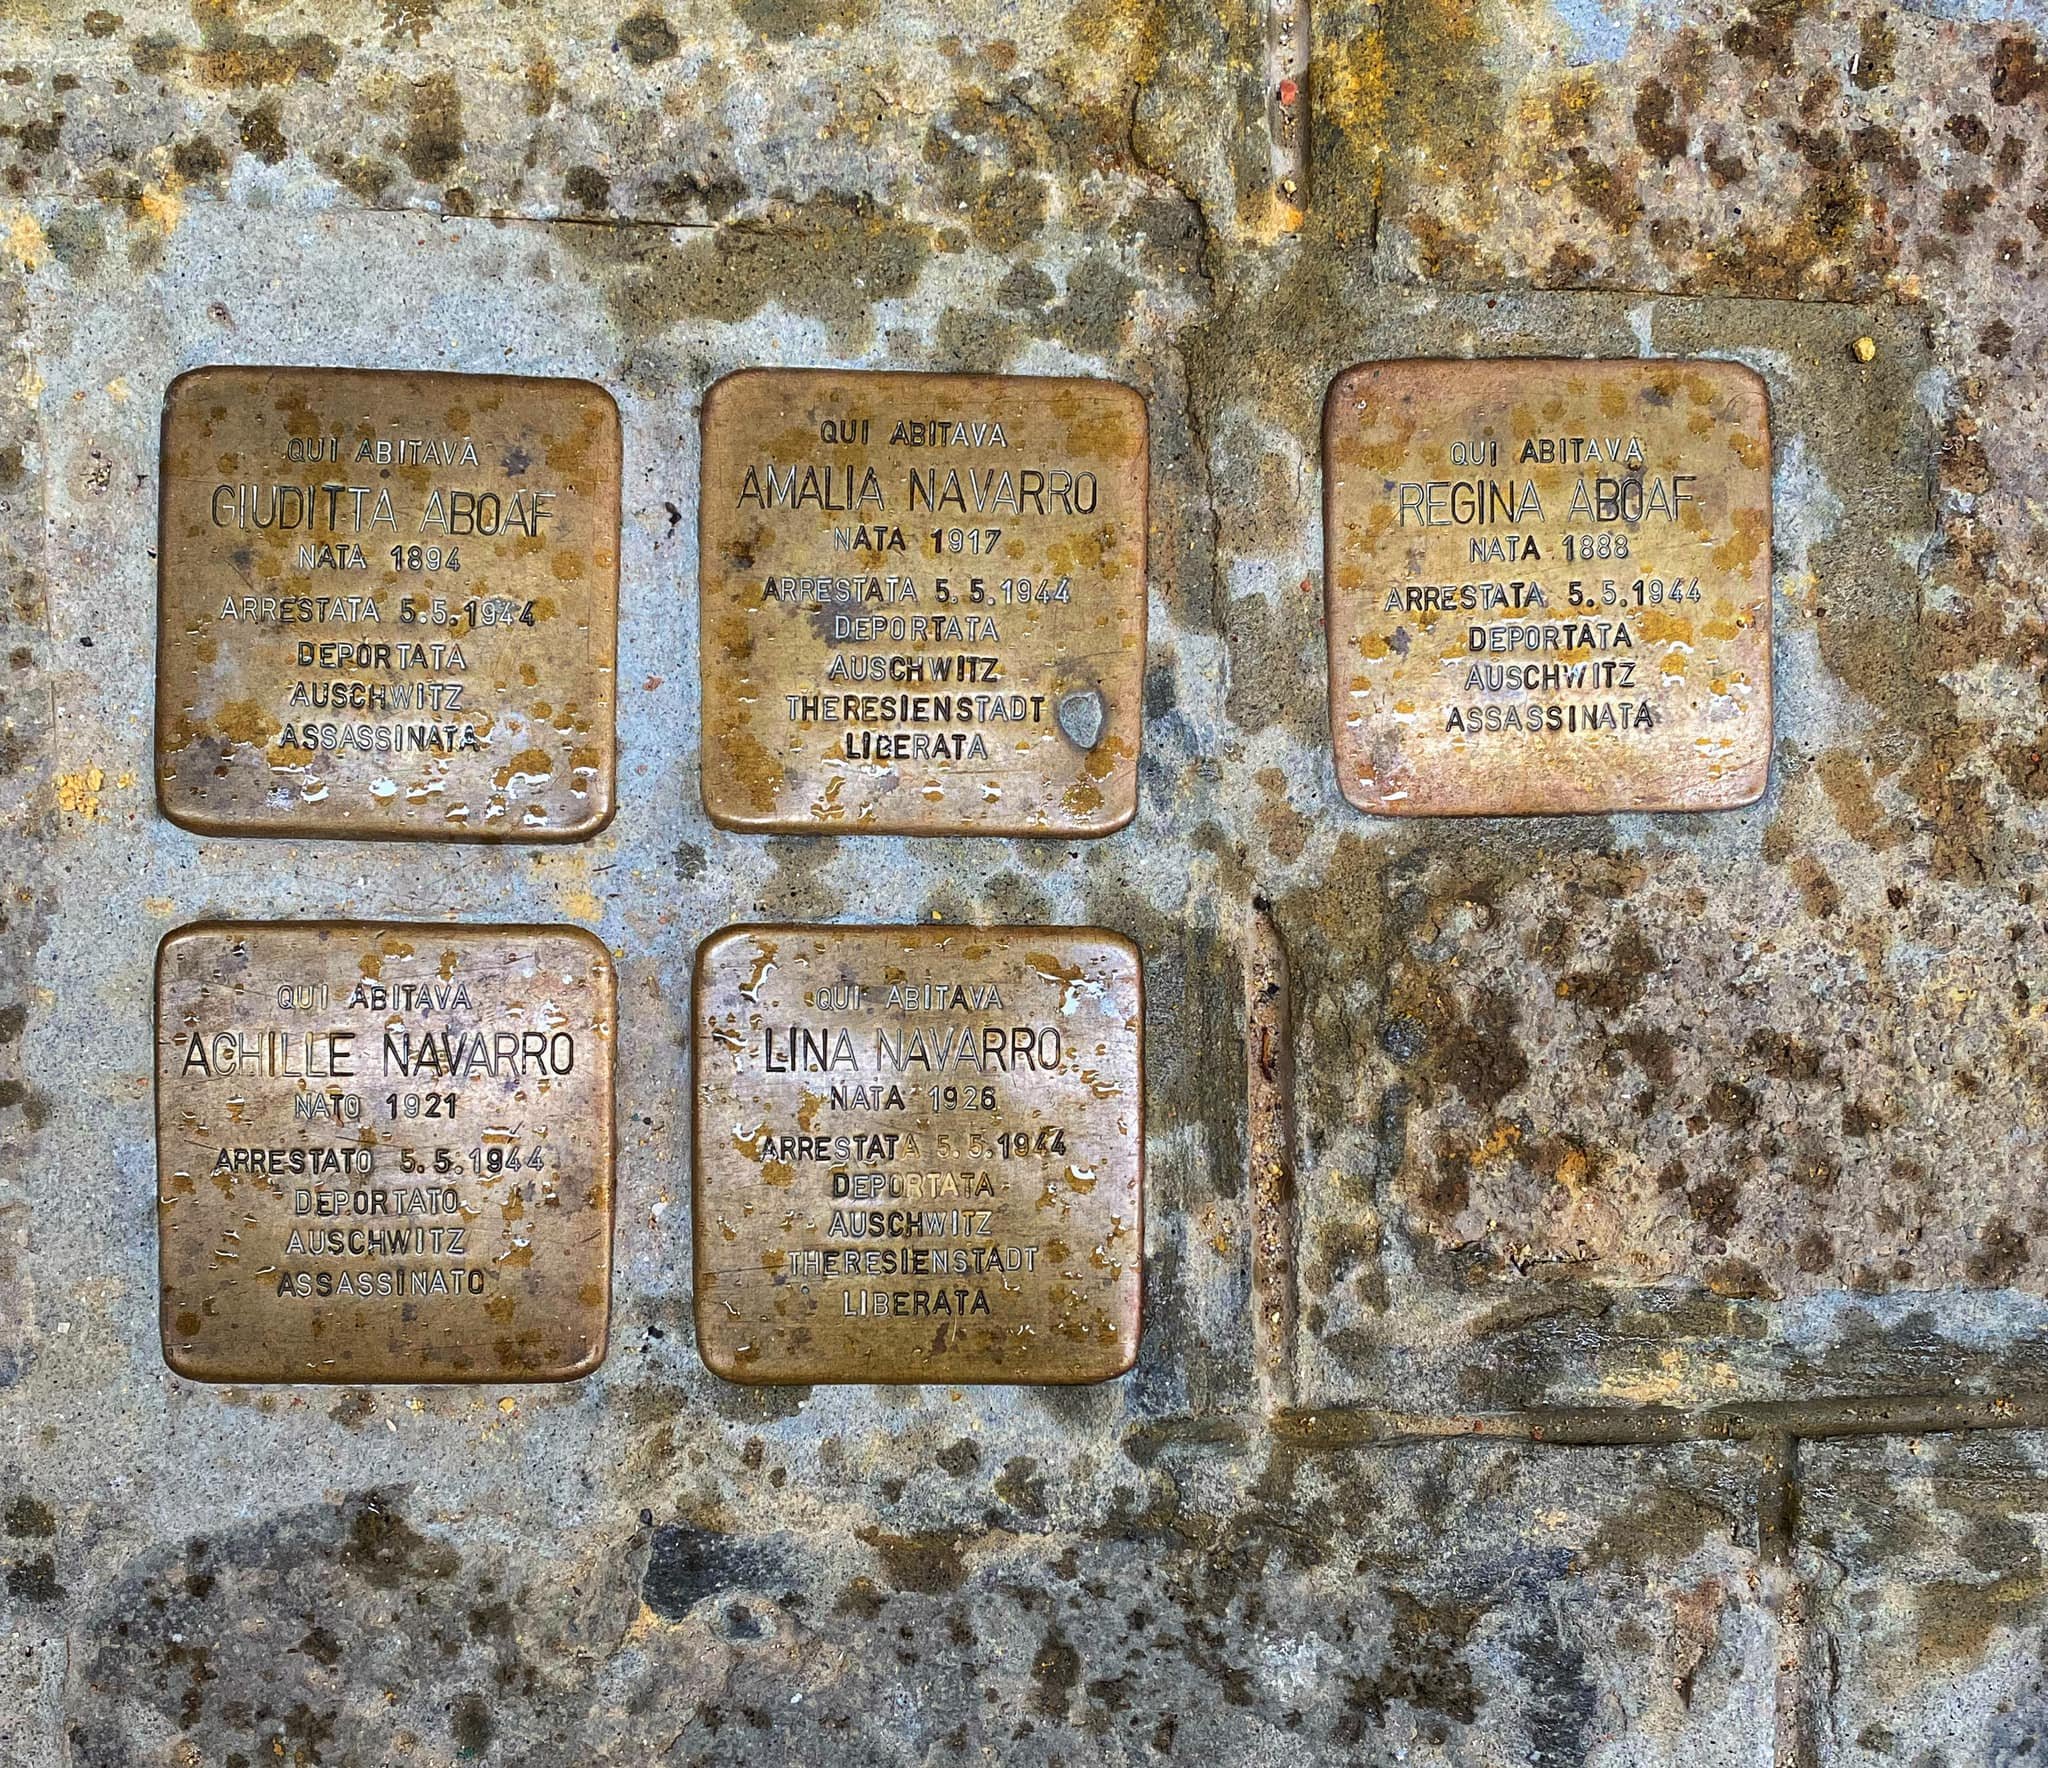  Look down: brass plaques in the oldest Jewish ghetto in the world (instituted in 1516 by decree of the doge and the Venetian Senate, and dissolved by Napoleon Bonaparte in 1797). The plaques are a late 20th century initiative in memory of those depo